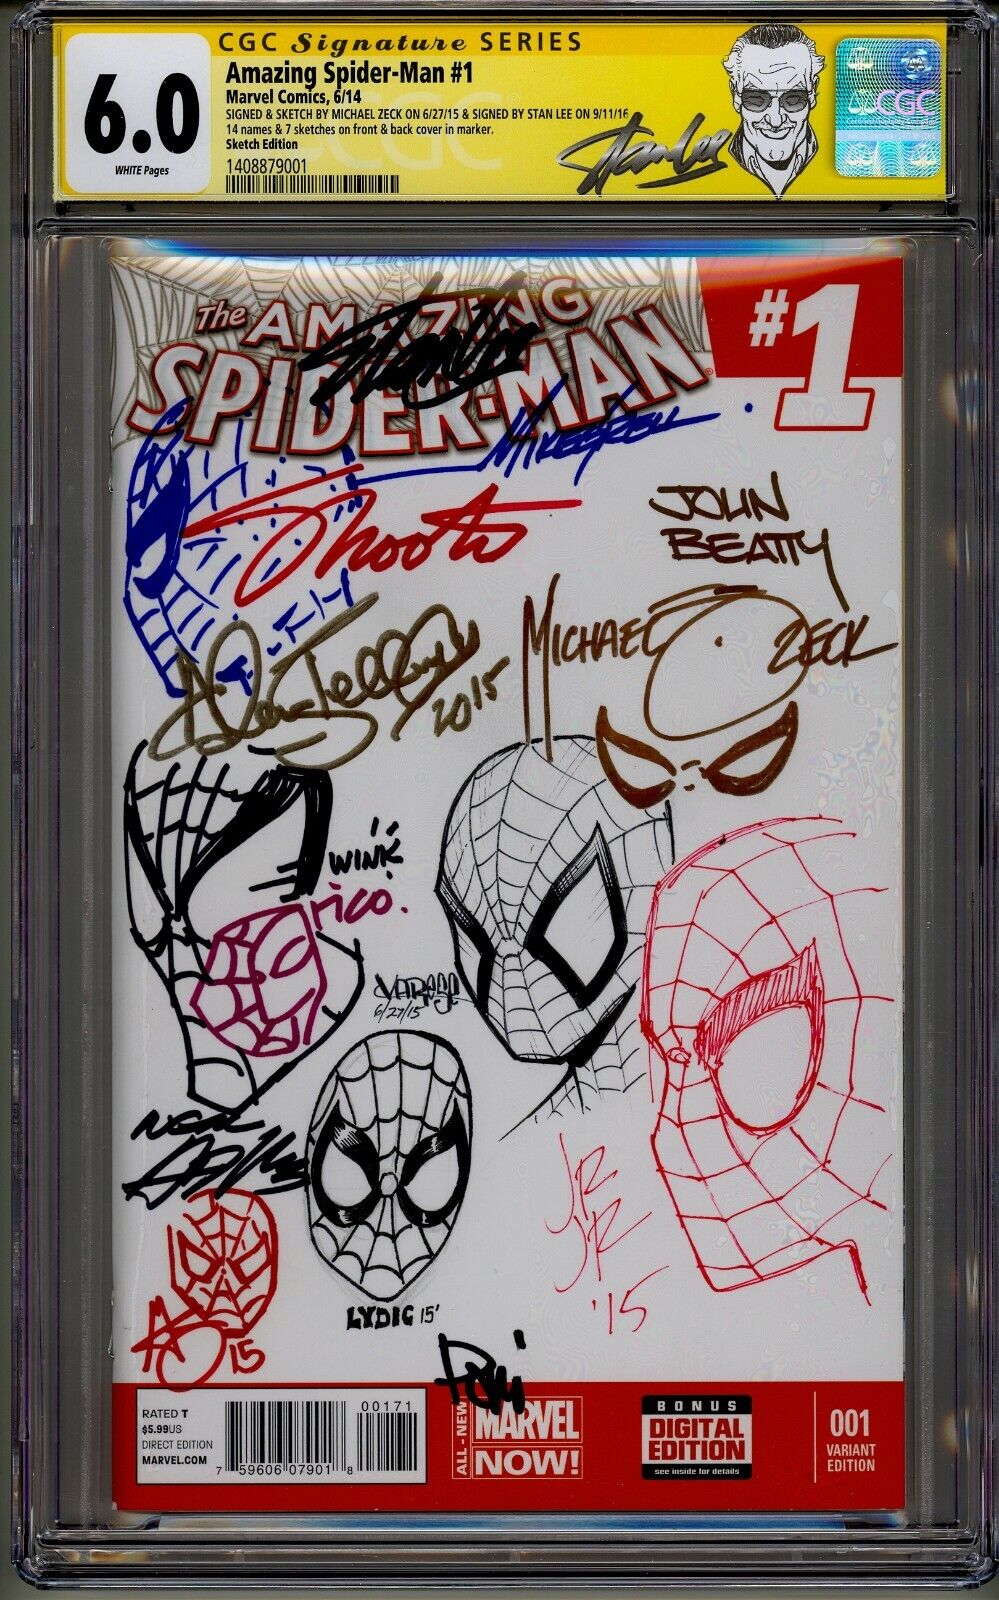 AMAZING SPIDER-MAN #1 CGC SS STAN LEE 6.0 SIGNED AND/OR SKETCHED BY 13 LEGENDS